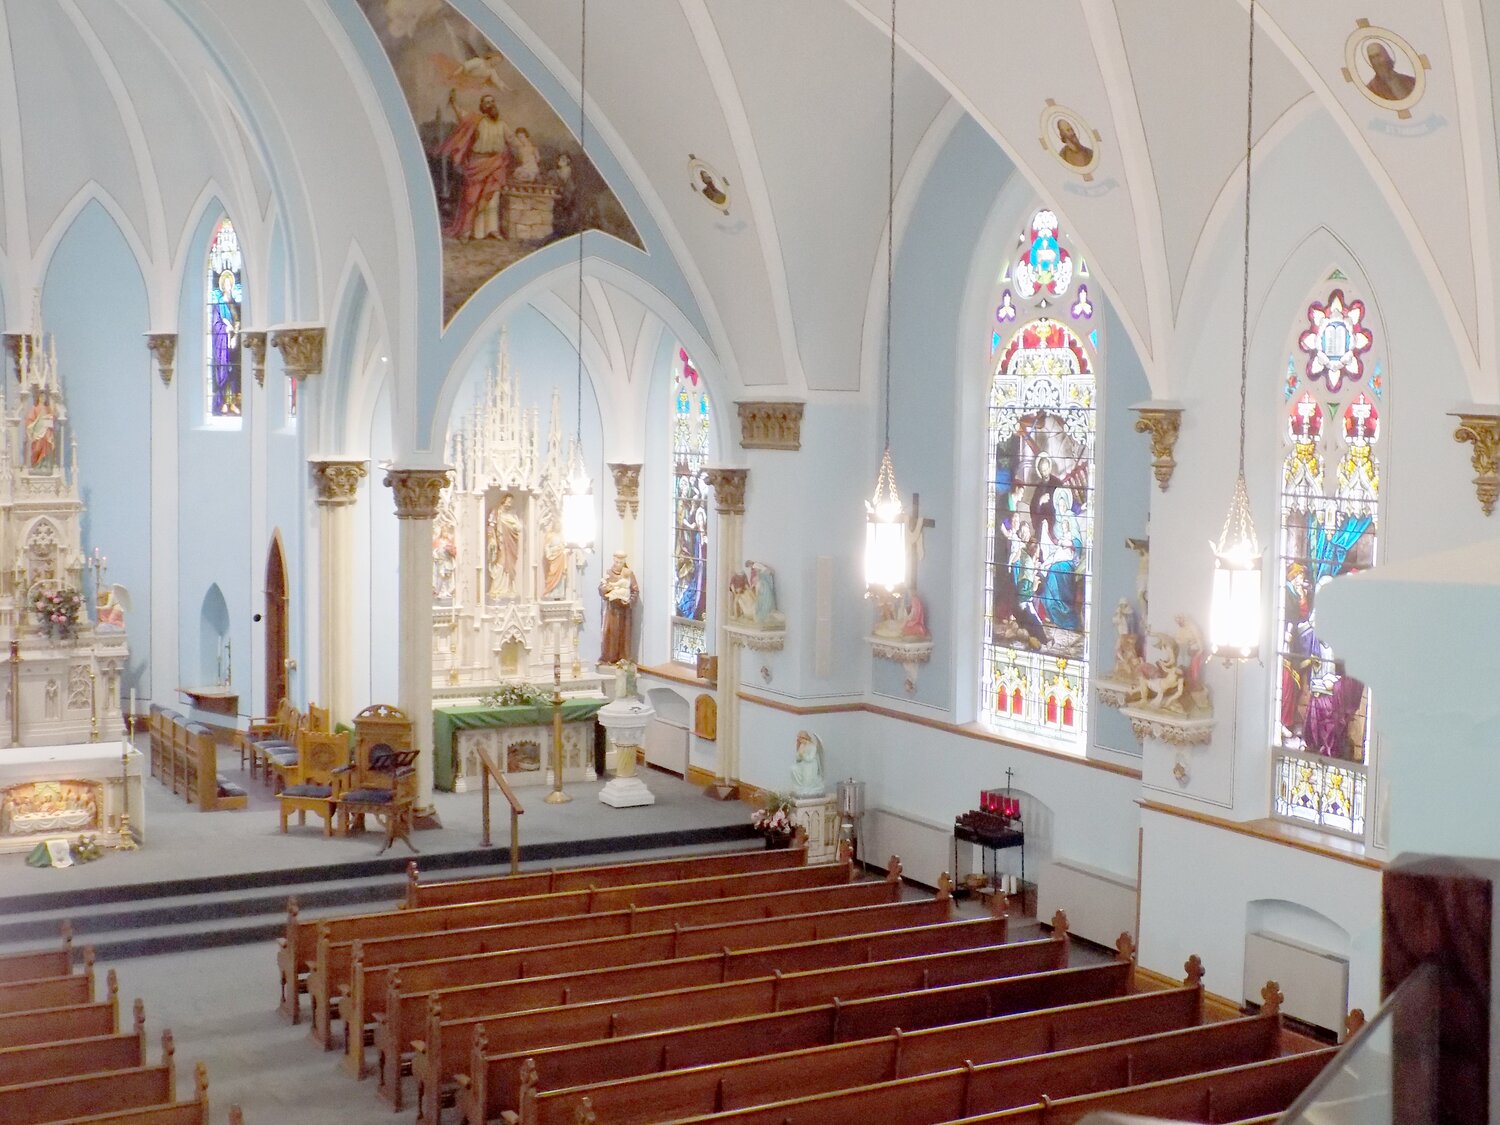 Sacred art surrounds parishioners at St. Mary’s, from ceiling frescos and paintings to statuary, stained-glass windows, and the Stations of the Cross.